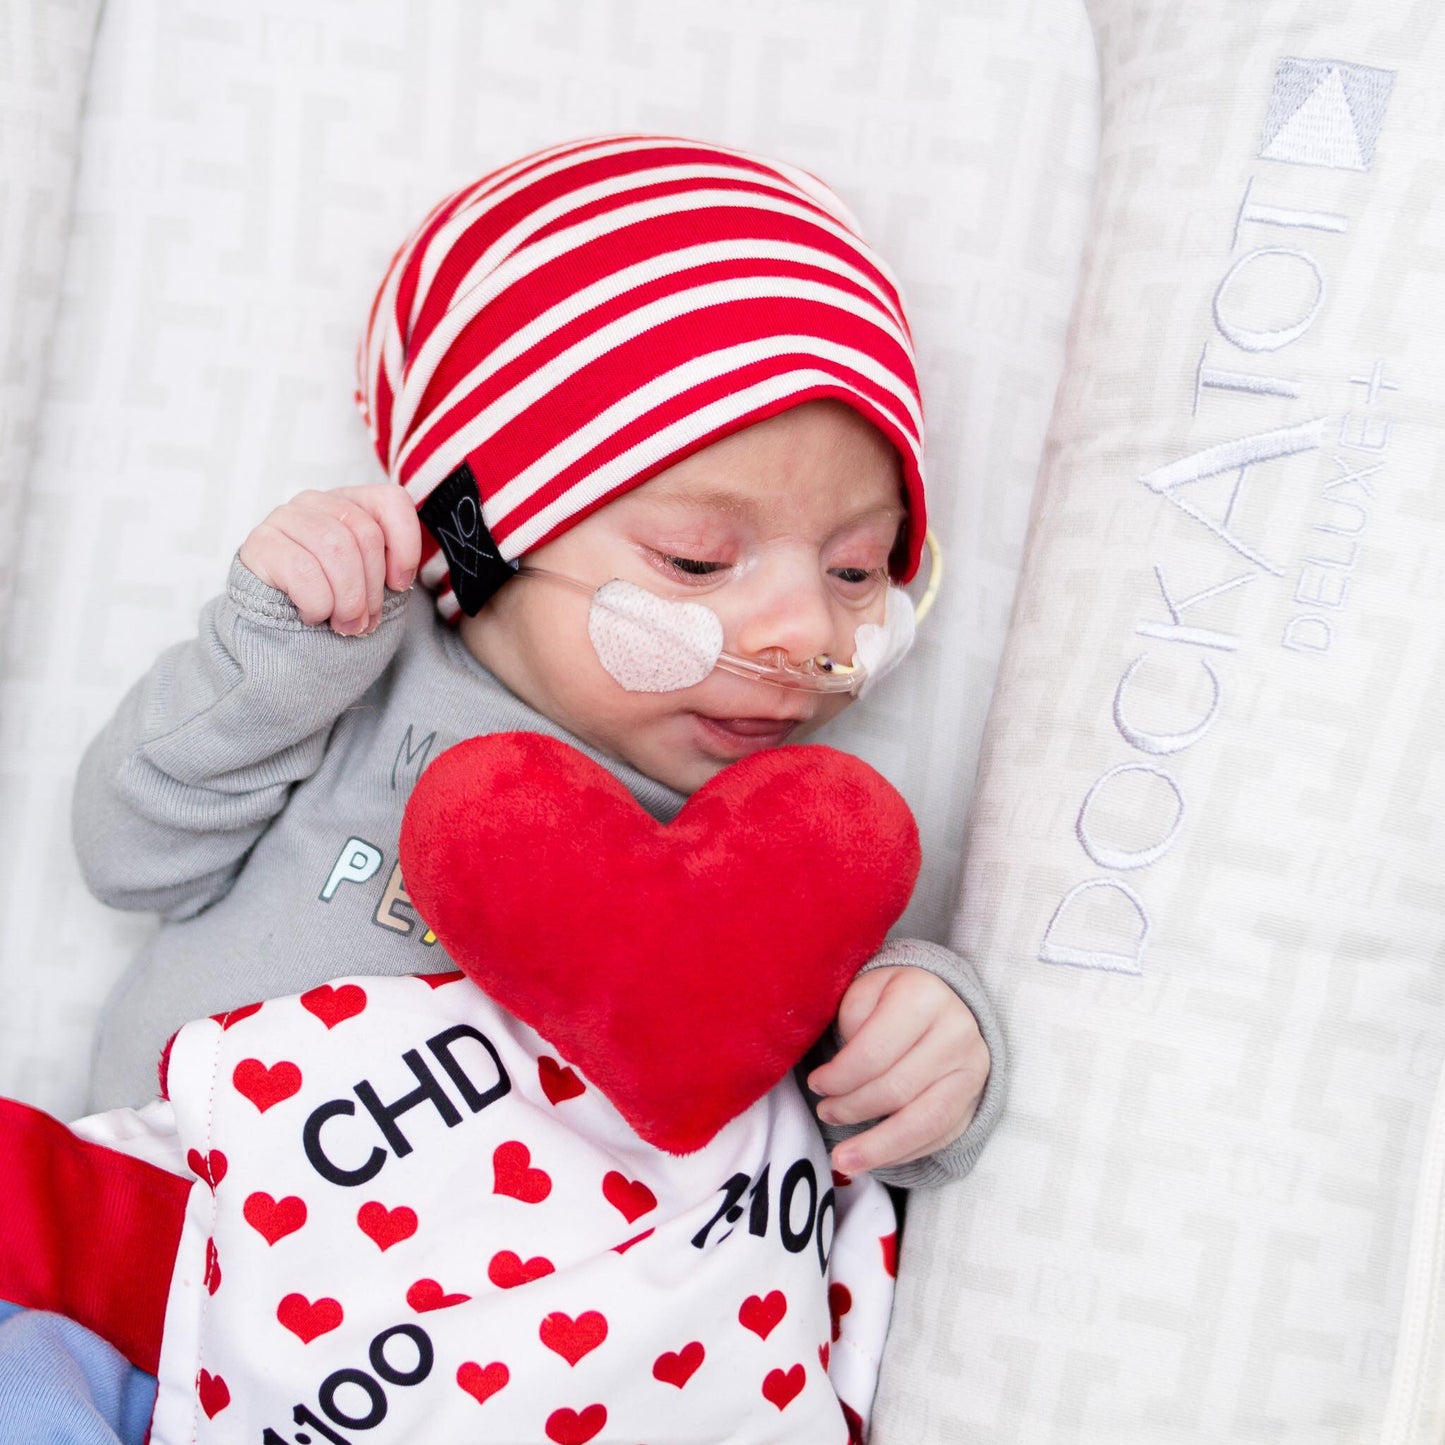 CHD Awareness 1:100 Tag Toy Lovey by Baby Jack